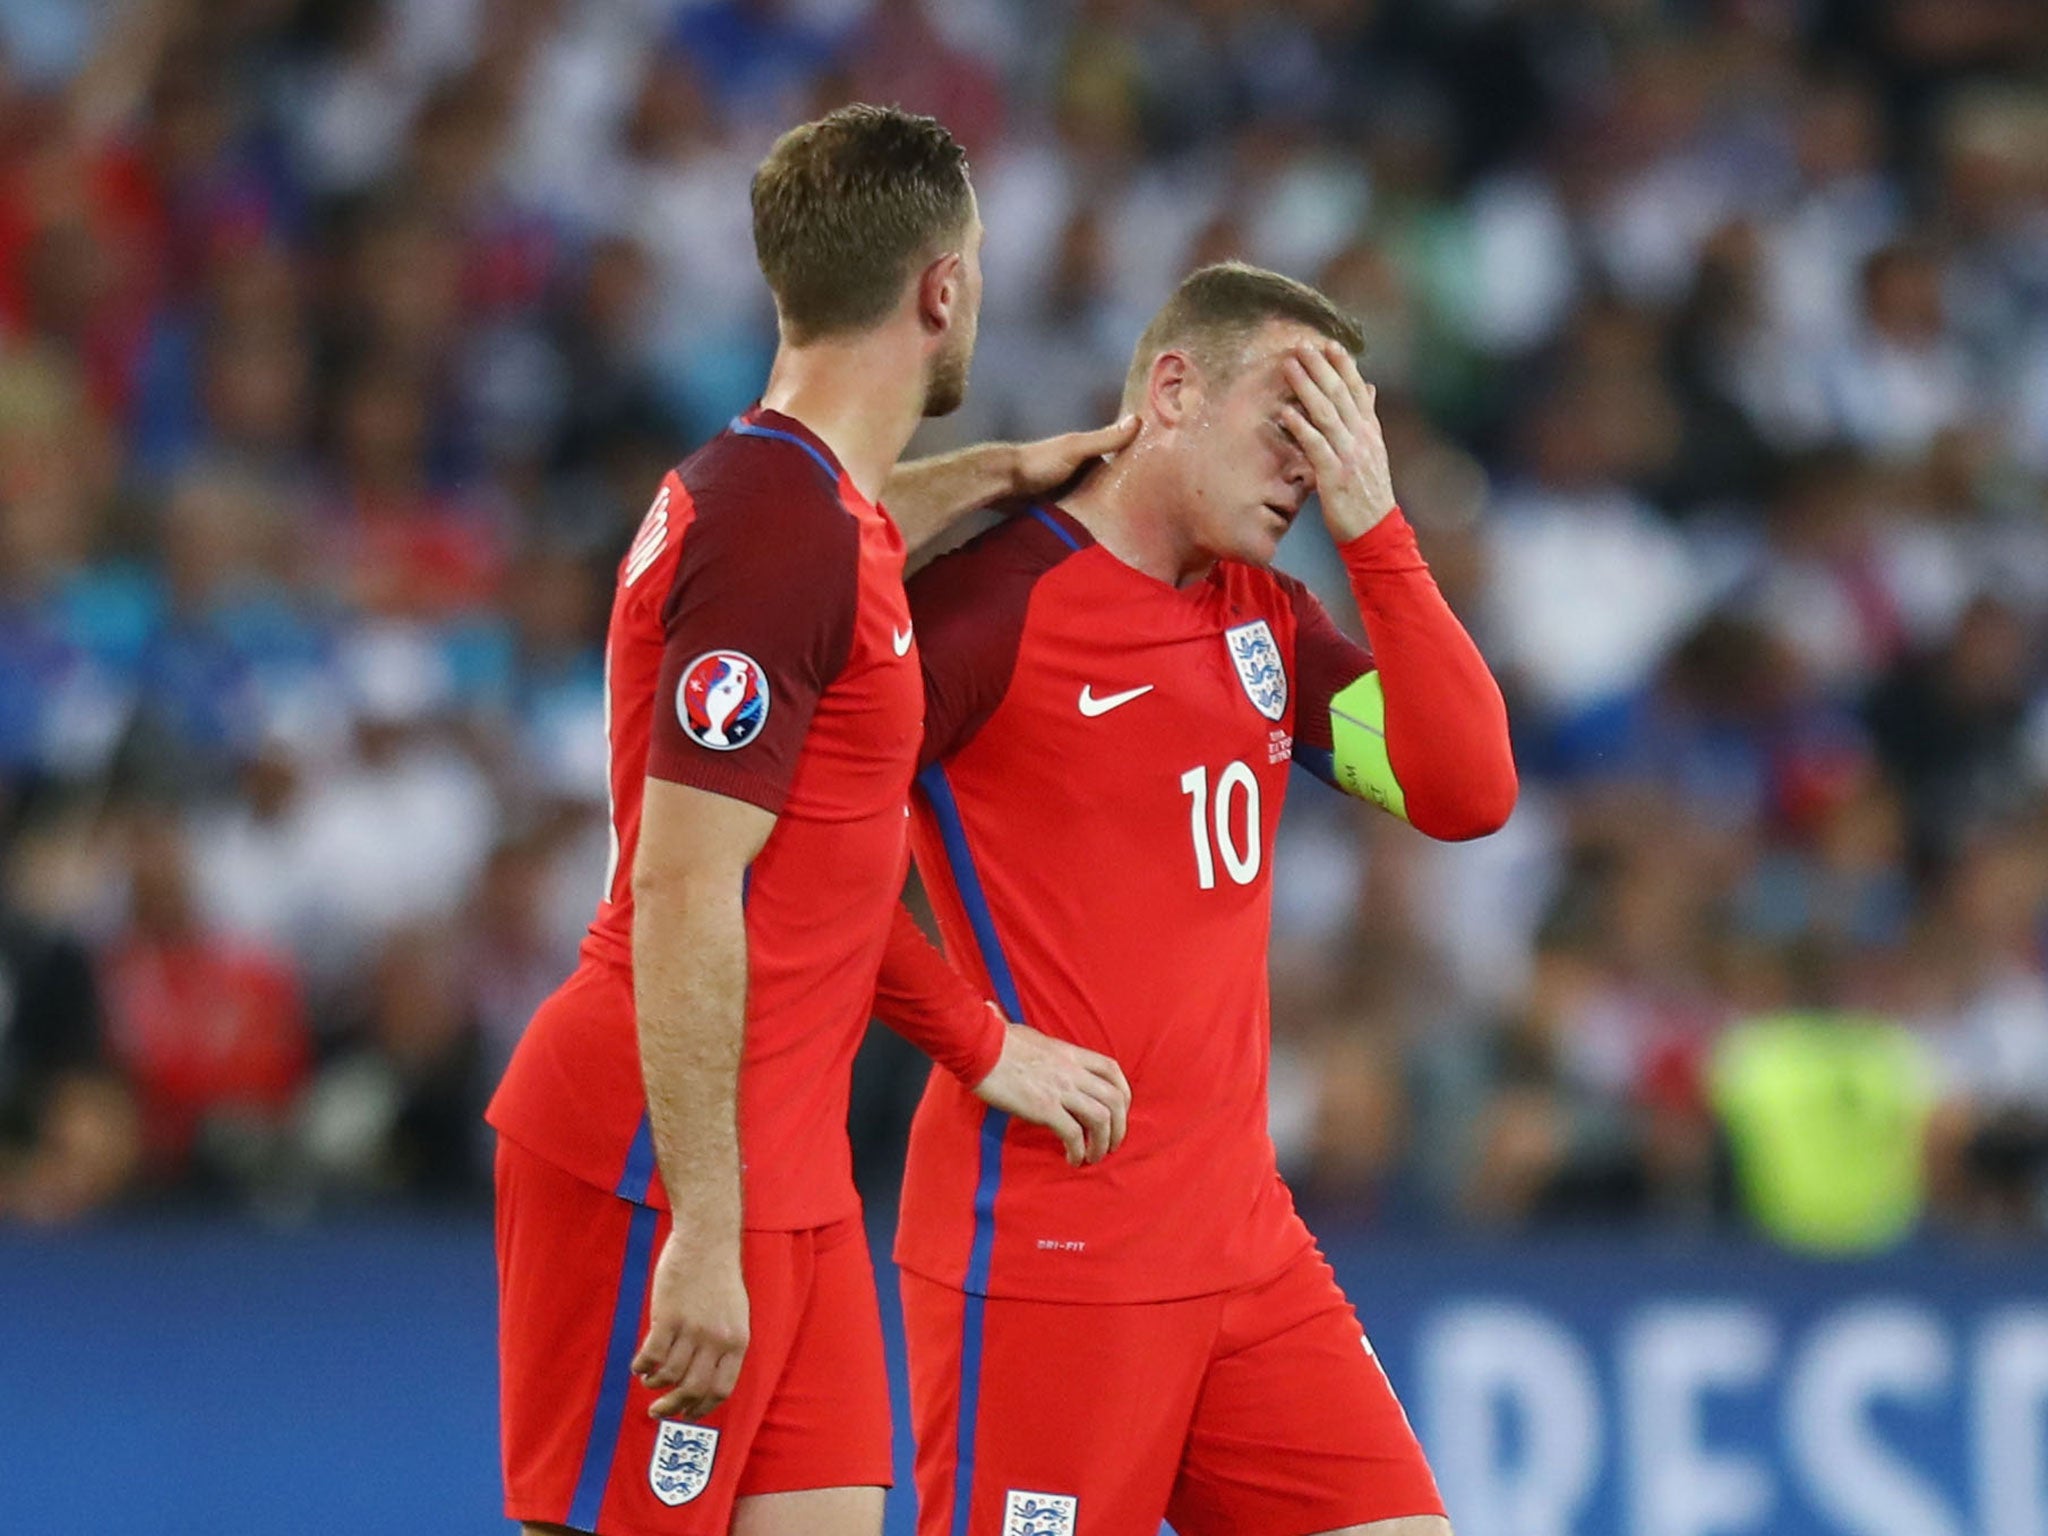 Jordan Henderson and Wayne Rooney feel the impact of finishing second in the group